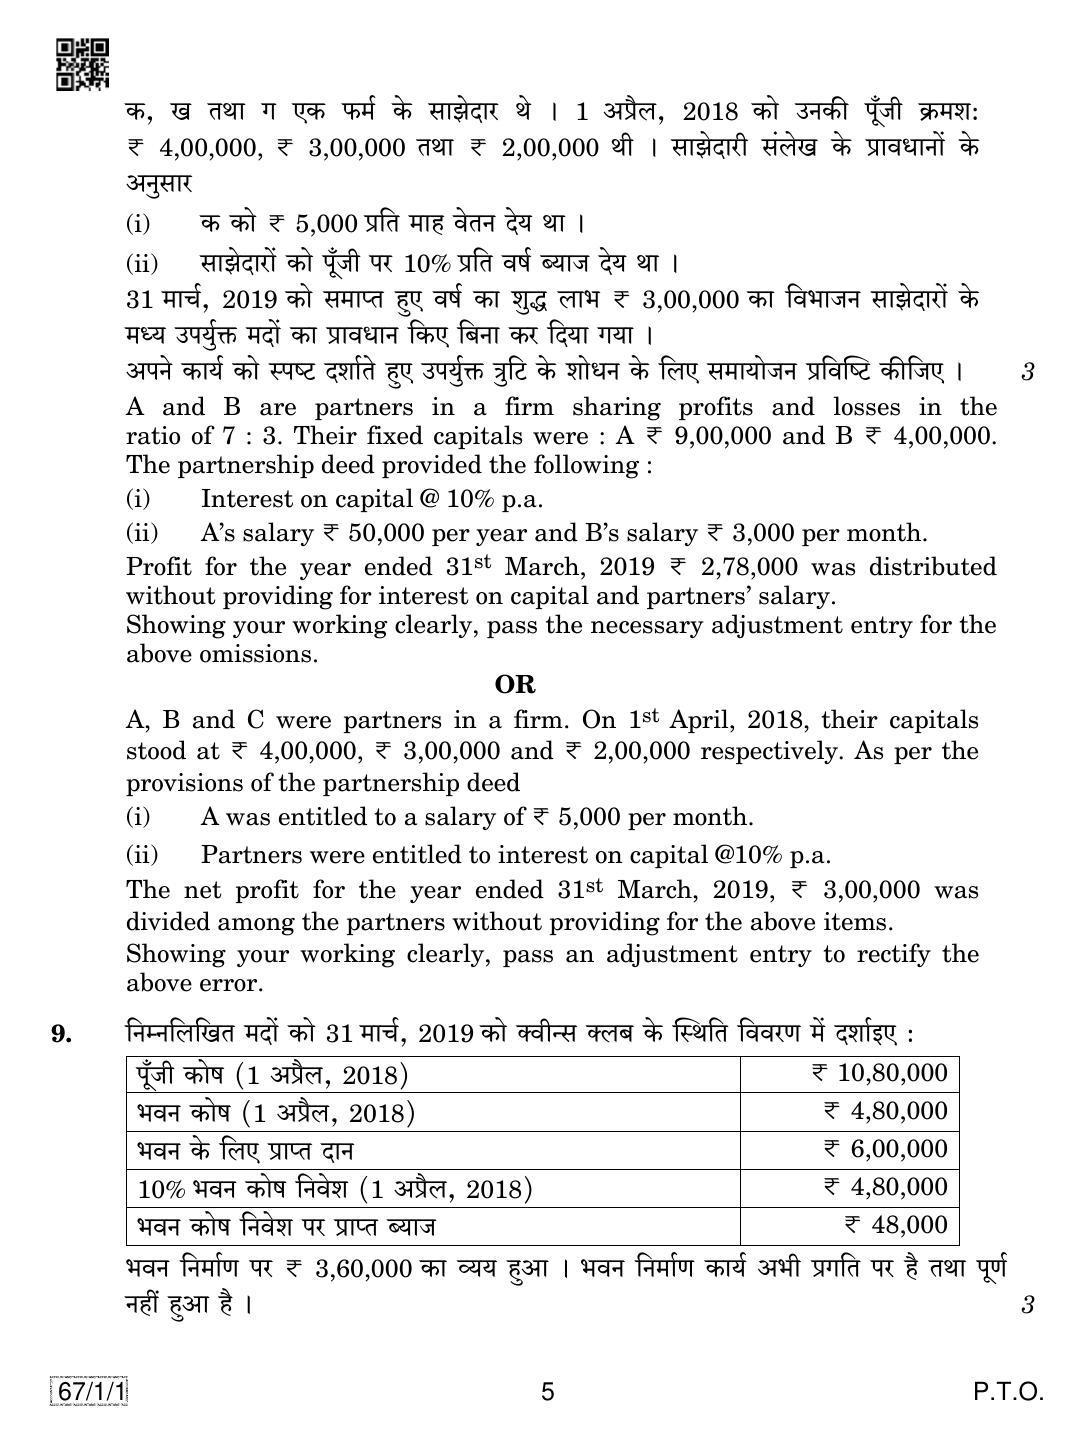 CBSE Class 12 67-1-1 ACCOUNTANCY 2019 Compartment Question Paper - Page 5